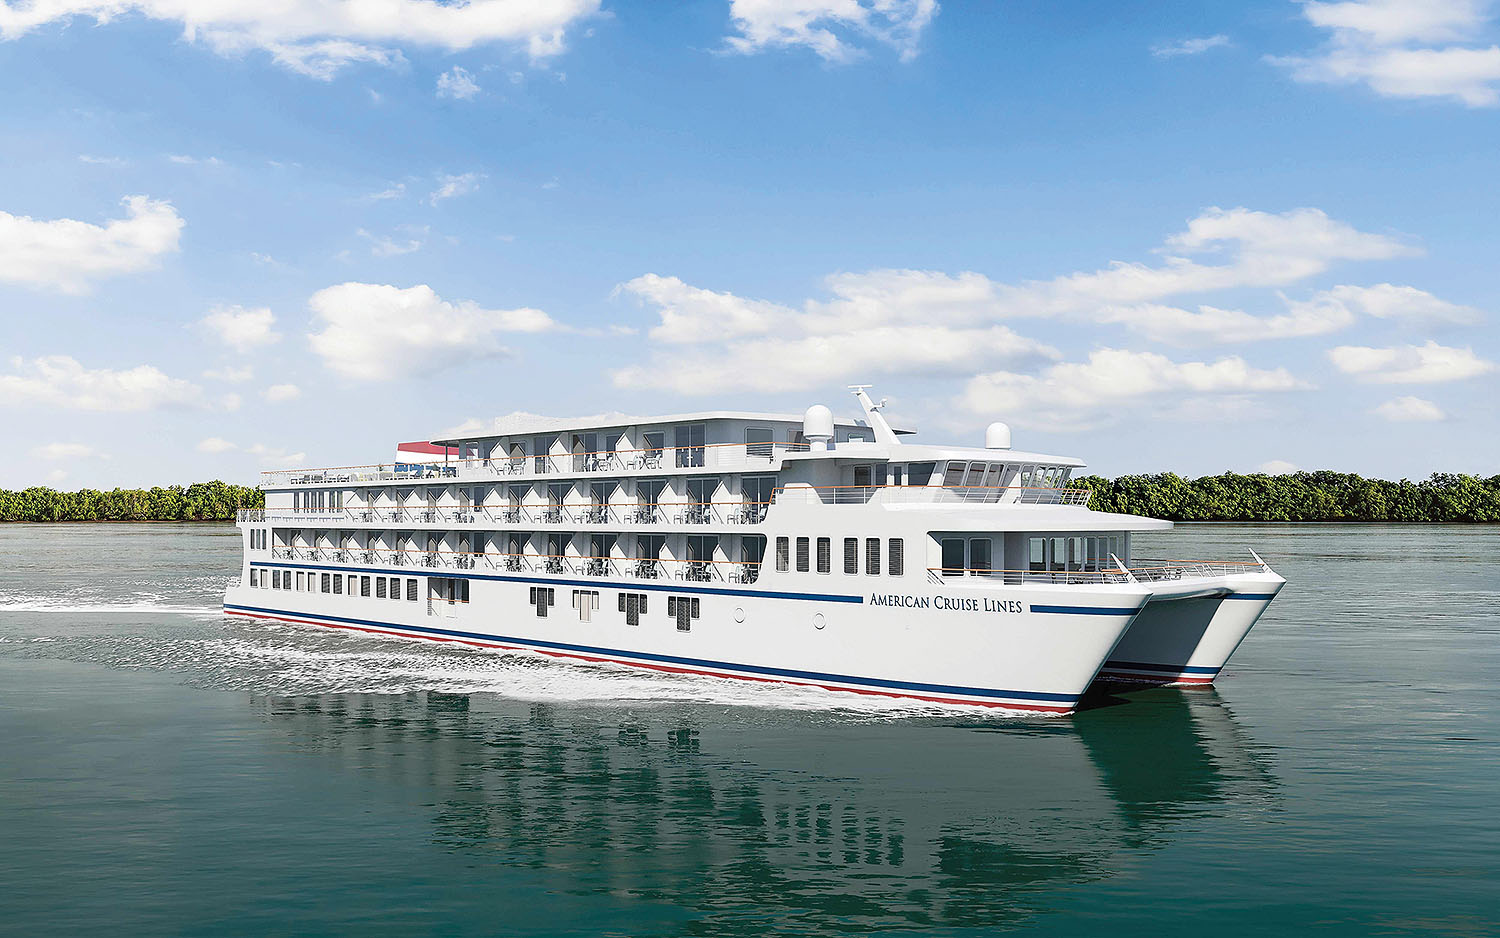 American Cruises Lines’ ‘Project Blue’ vessels will measure 241 by 56 feet, with accommodations for 109 passengers.